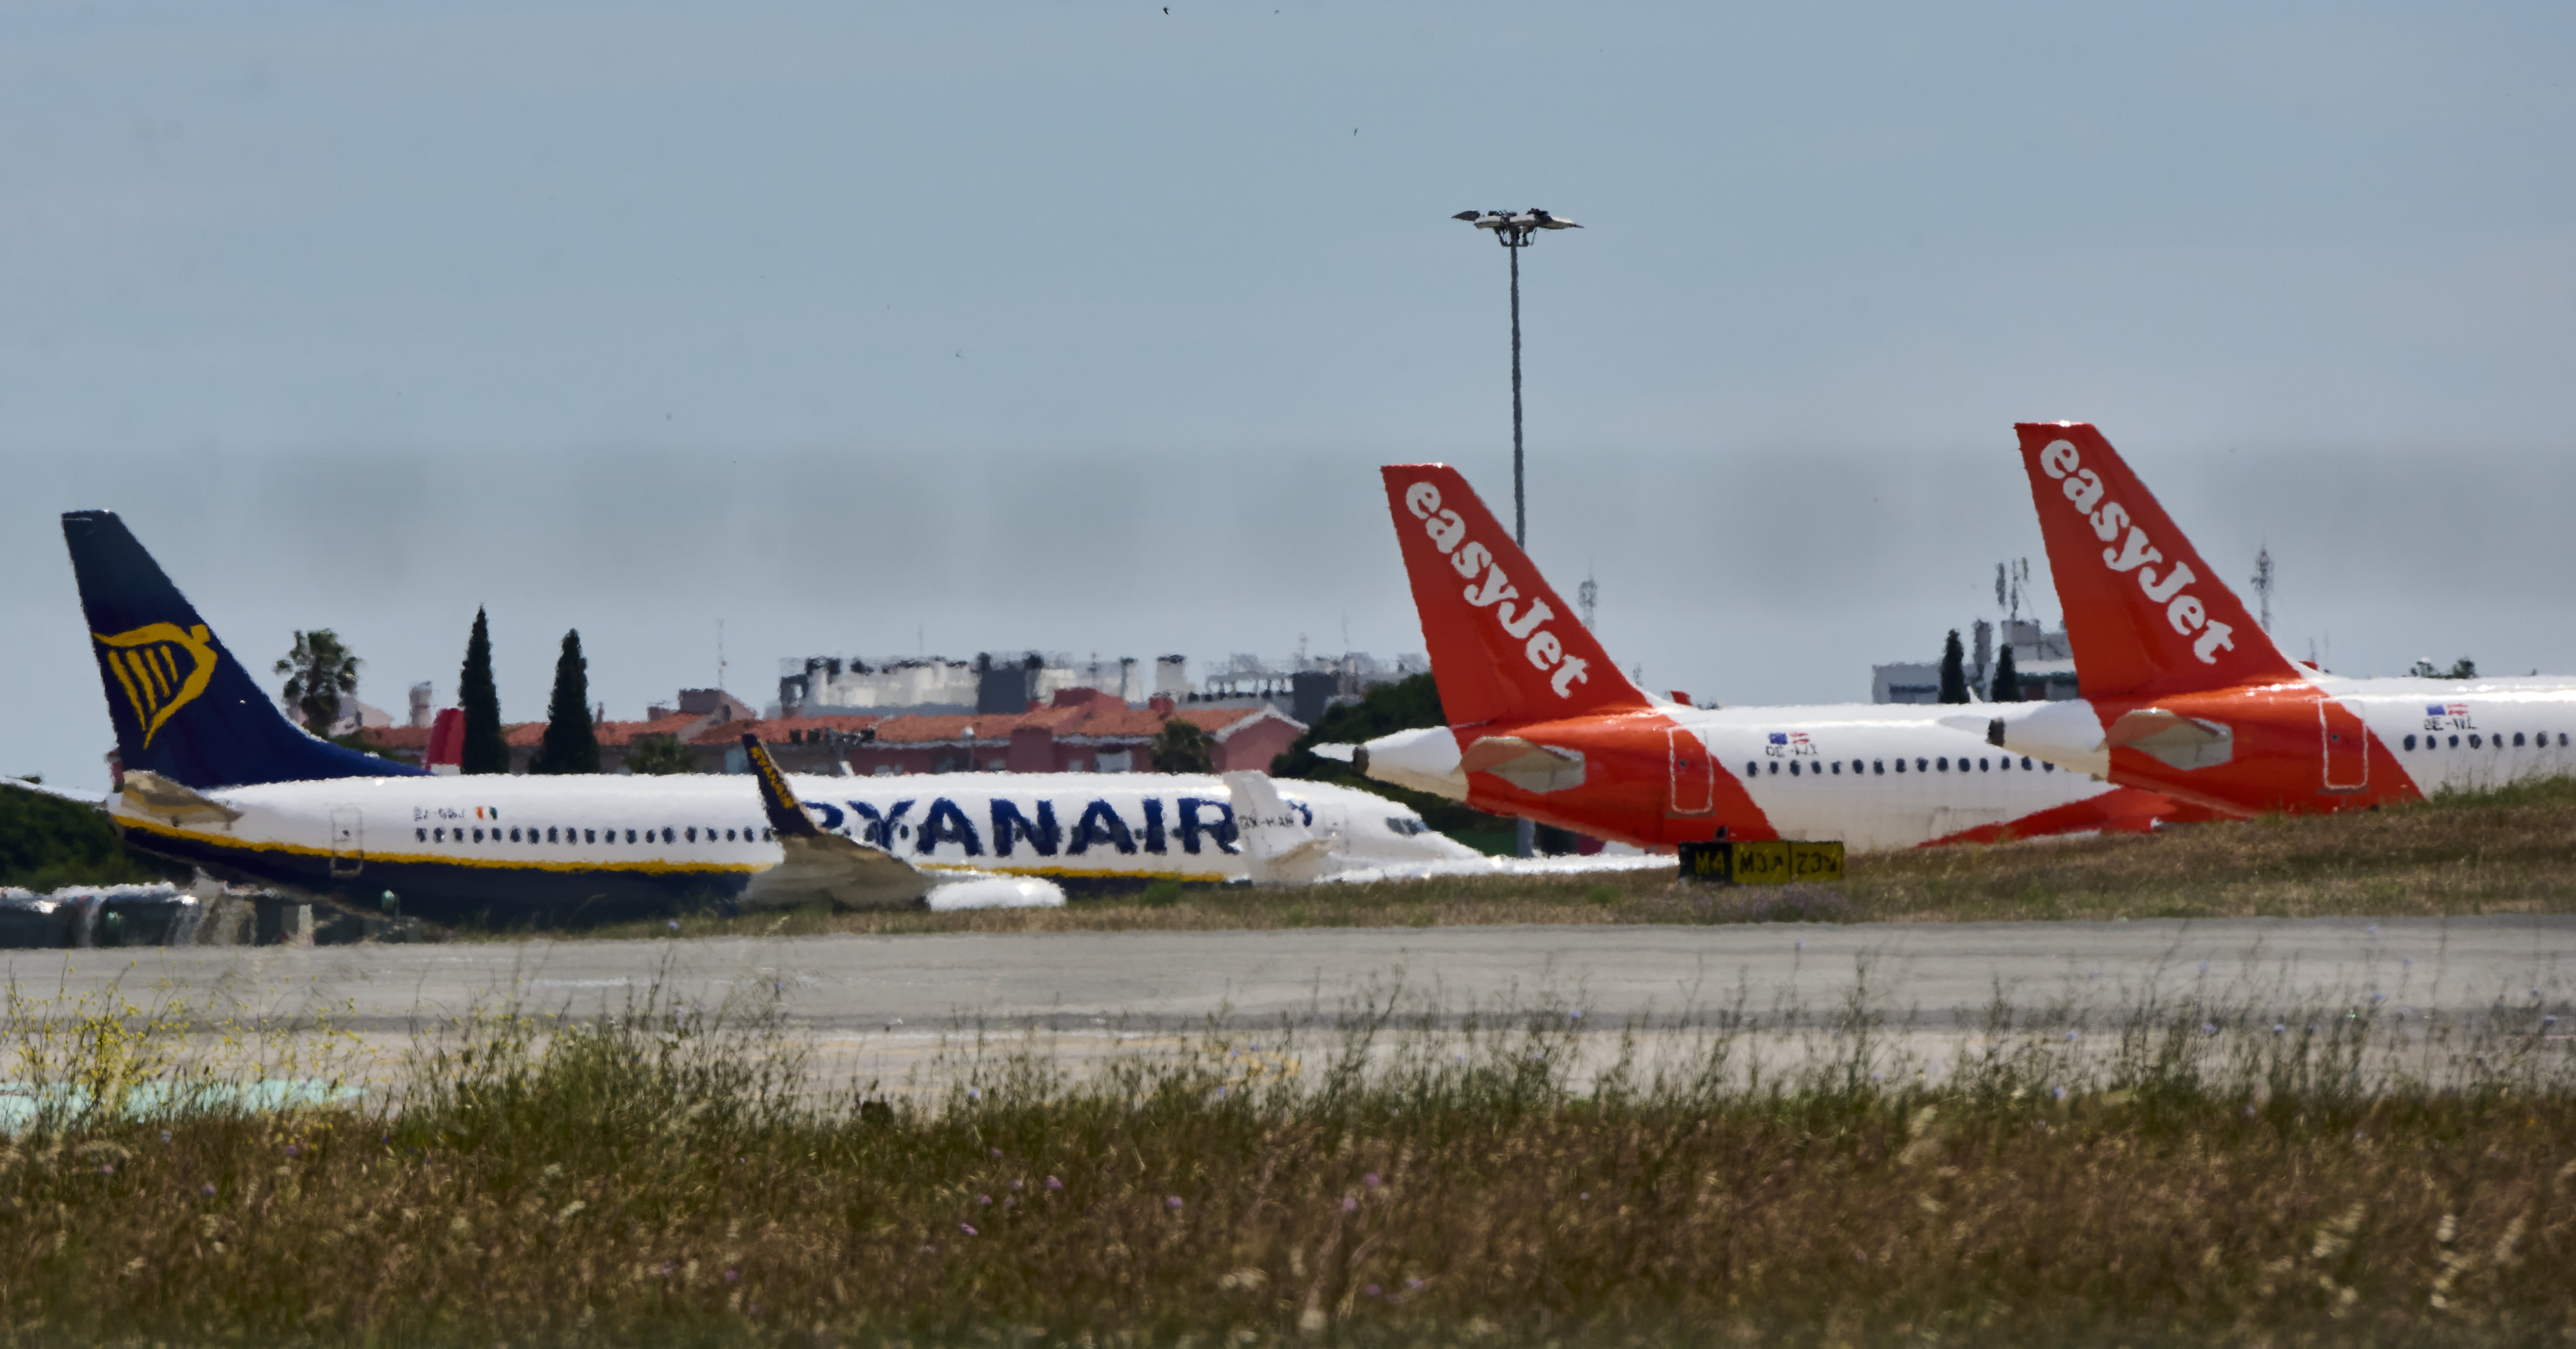 Europe's low-cost airlines could have the edge in a post-Covid world